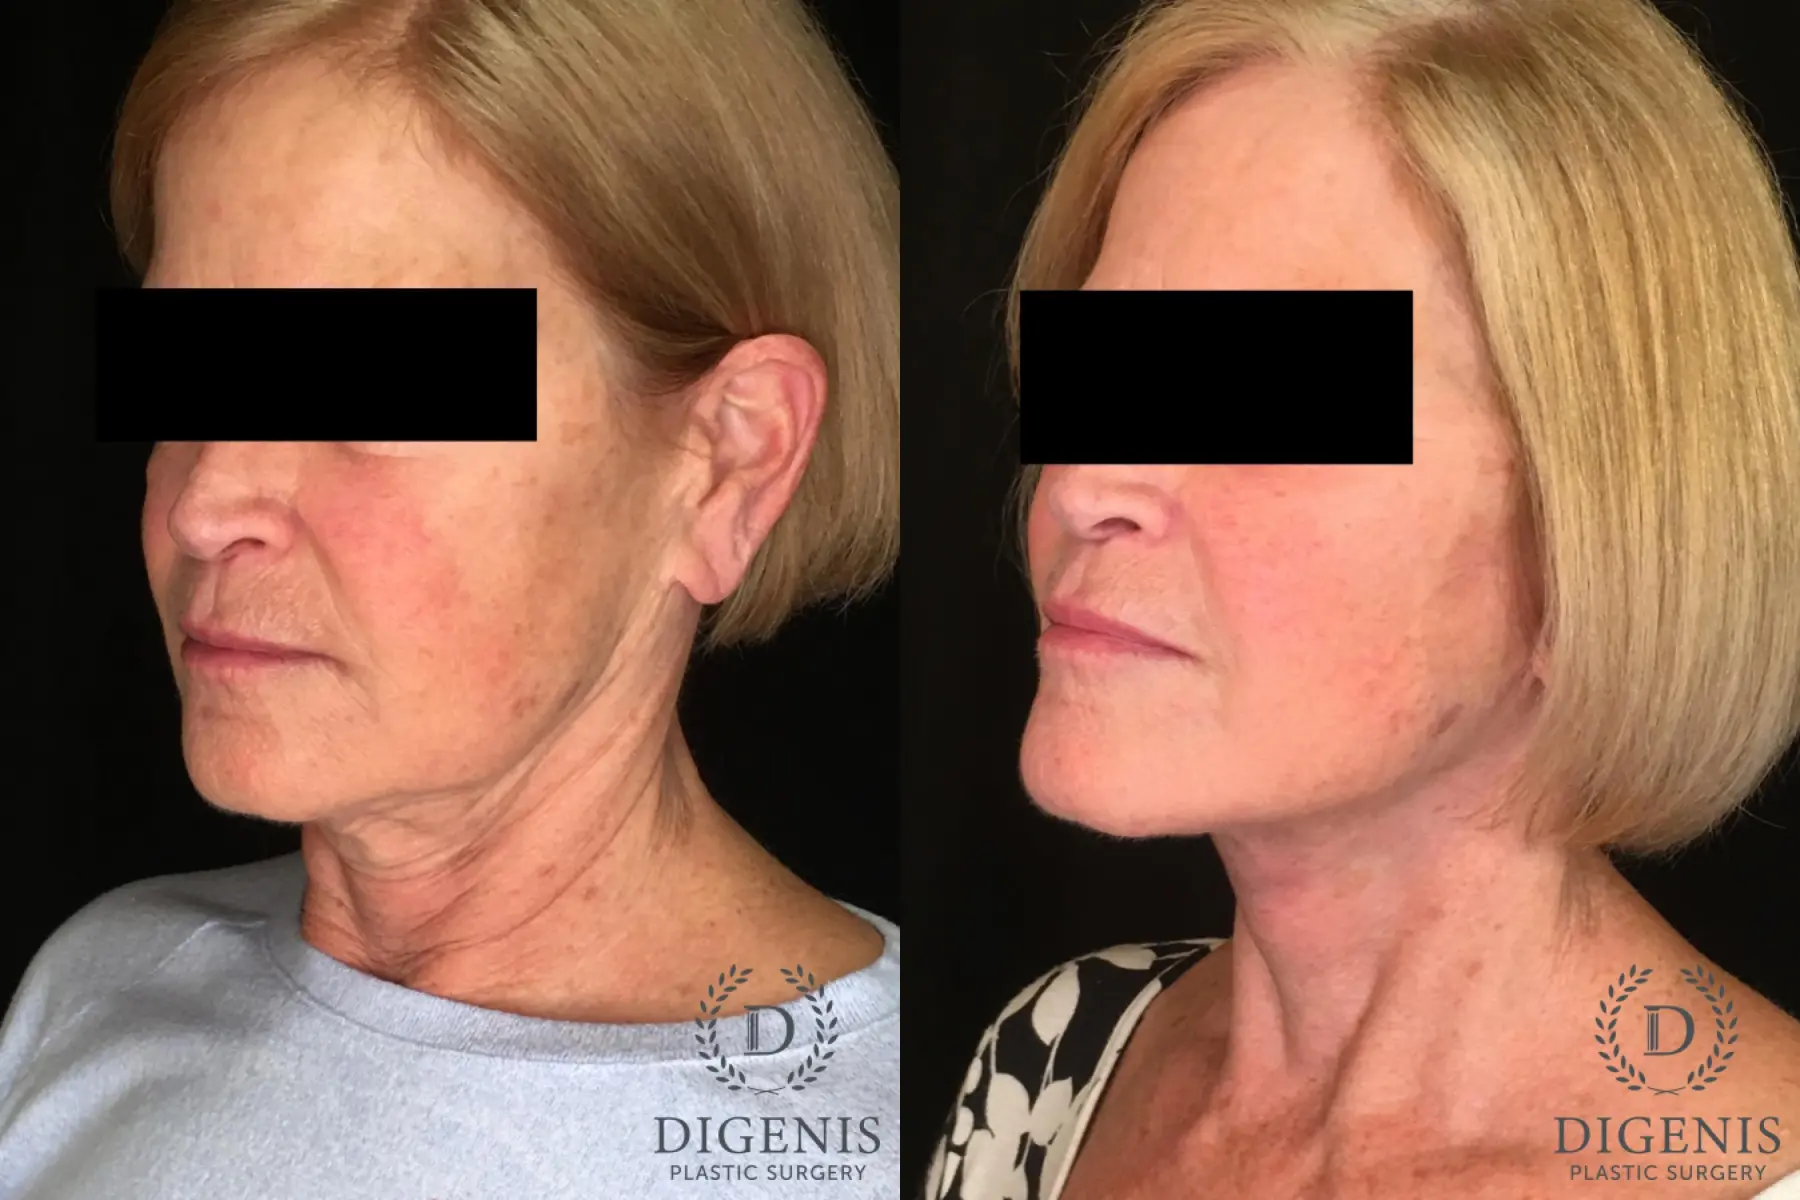 Facelift: Patient 1 - Before and After 4